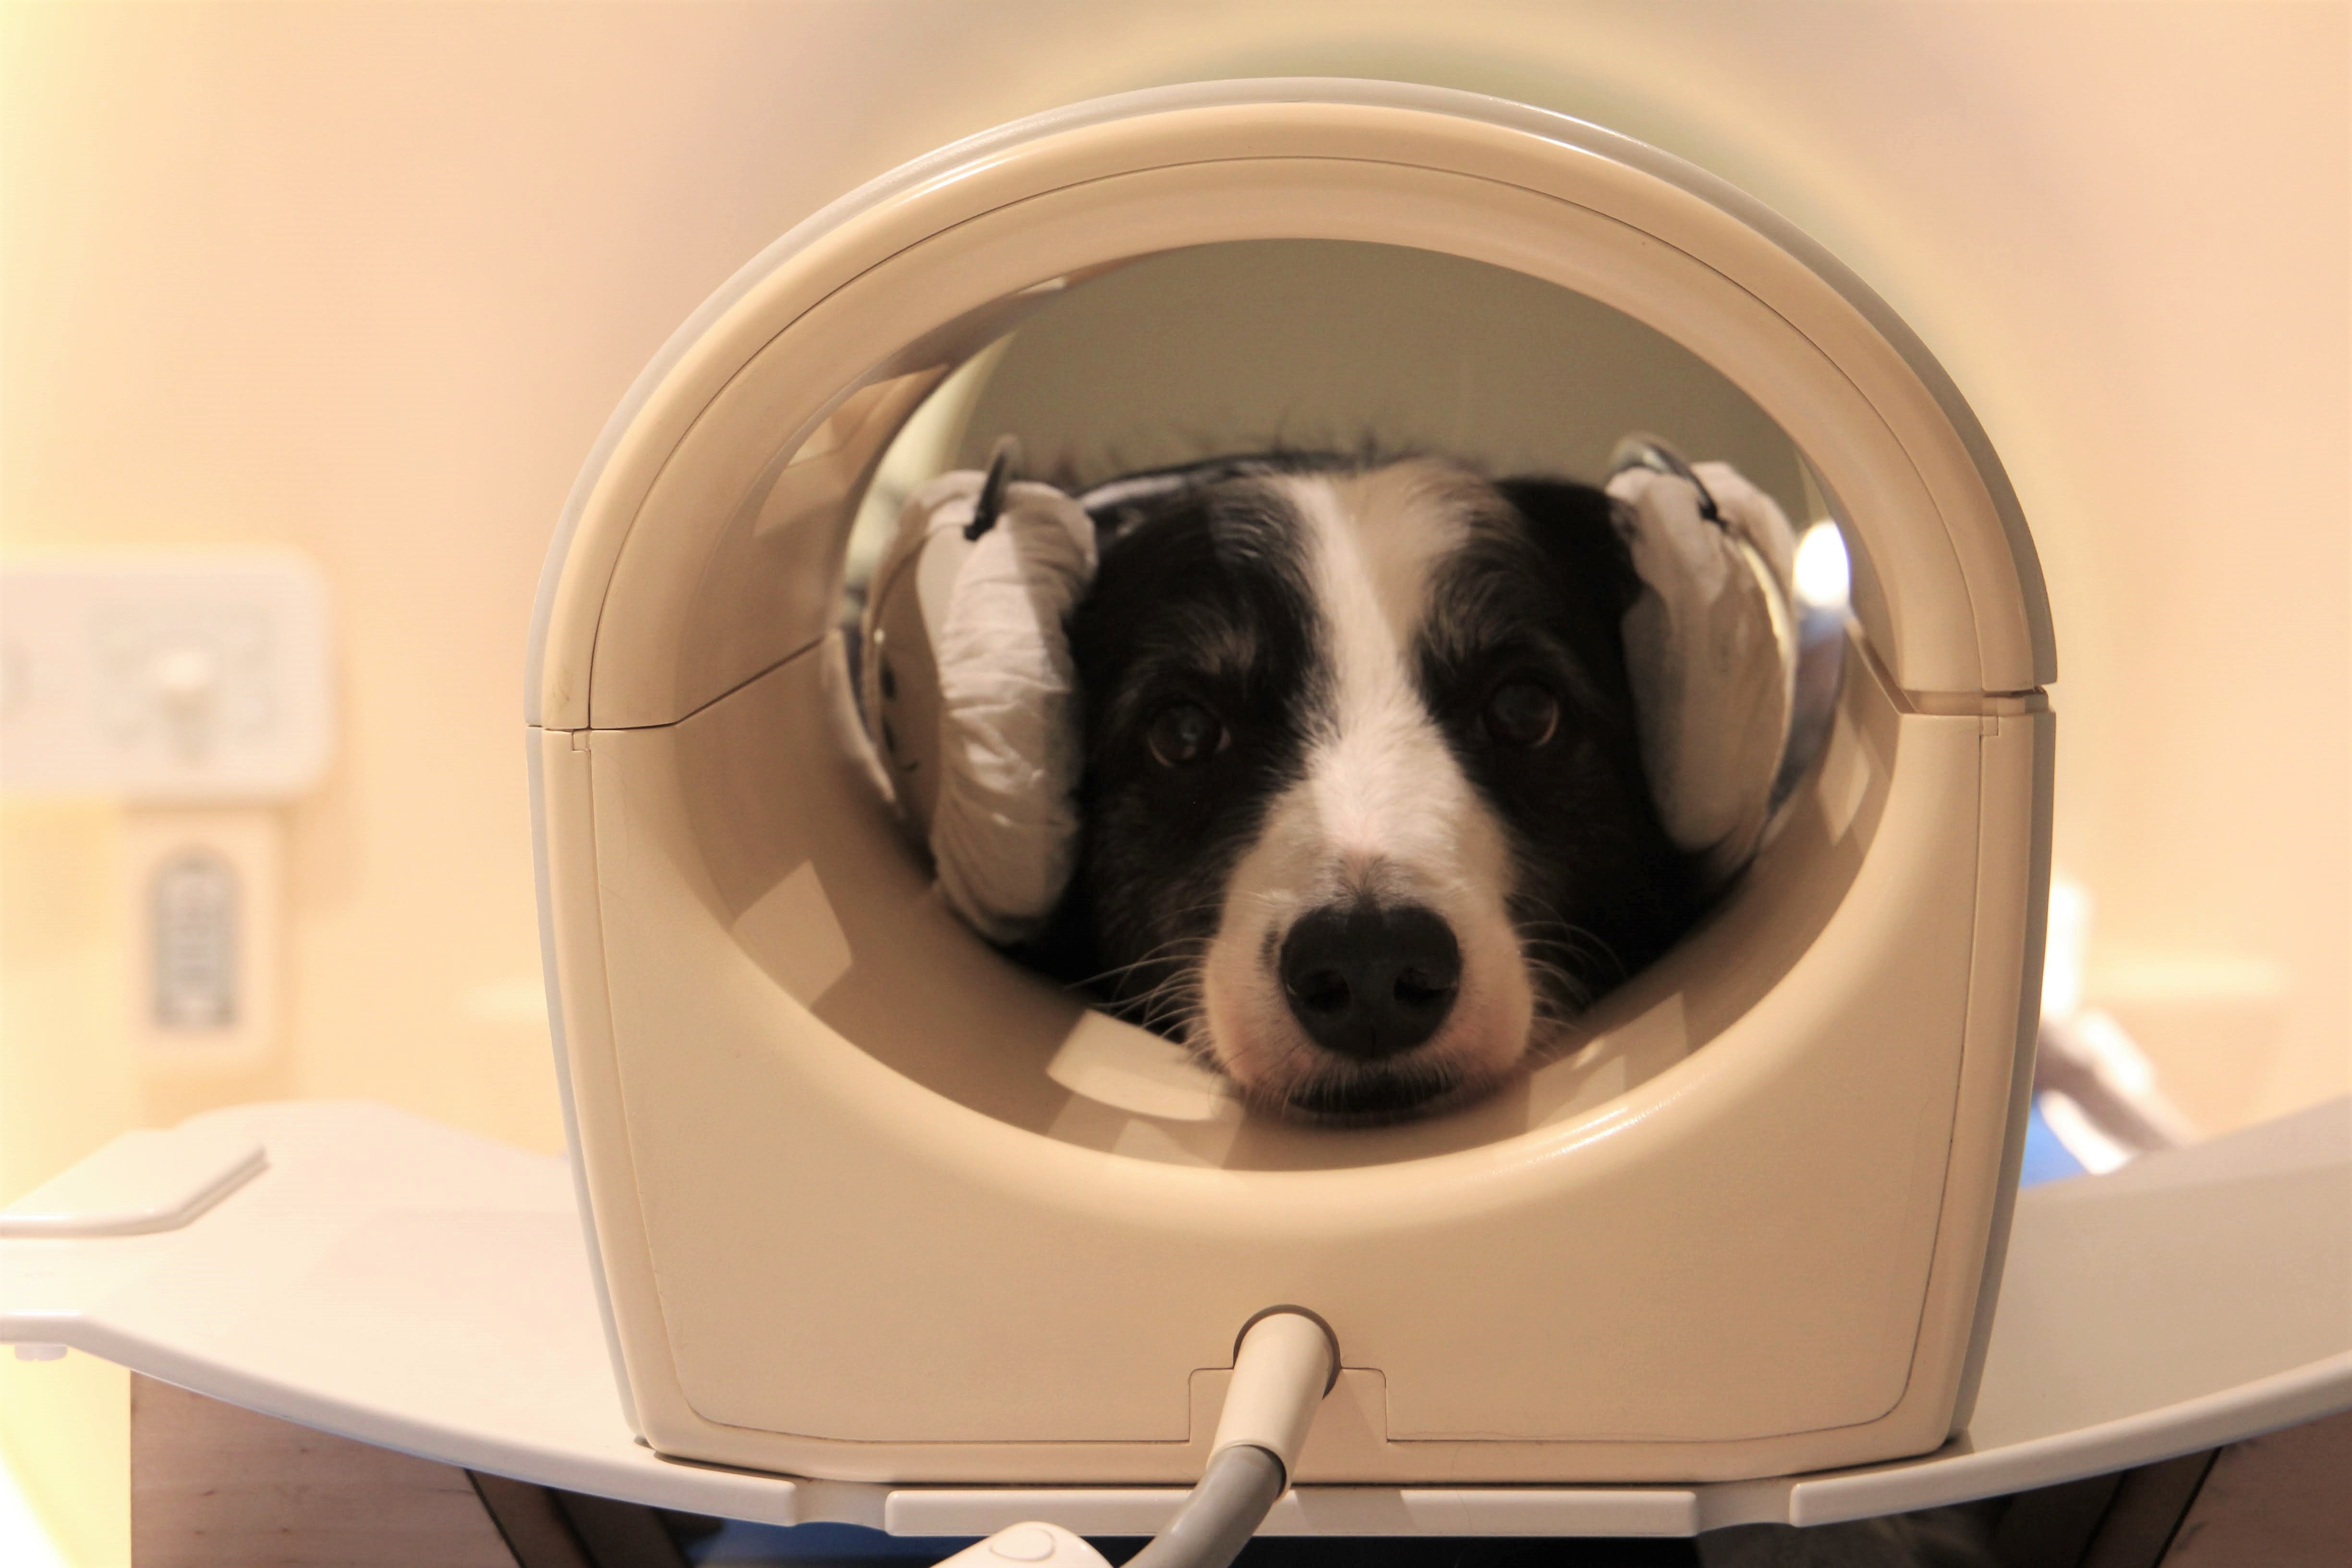 <p>Dog brains can detect speech, and show different activity patterns to a familiar and an unfamiliar language, a new brain imaging study has found</p>